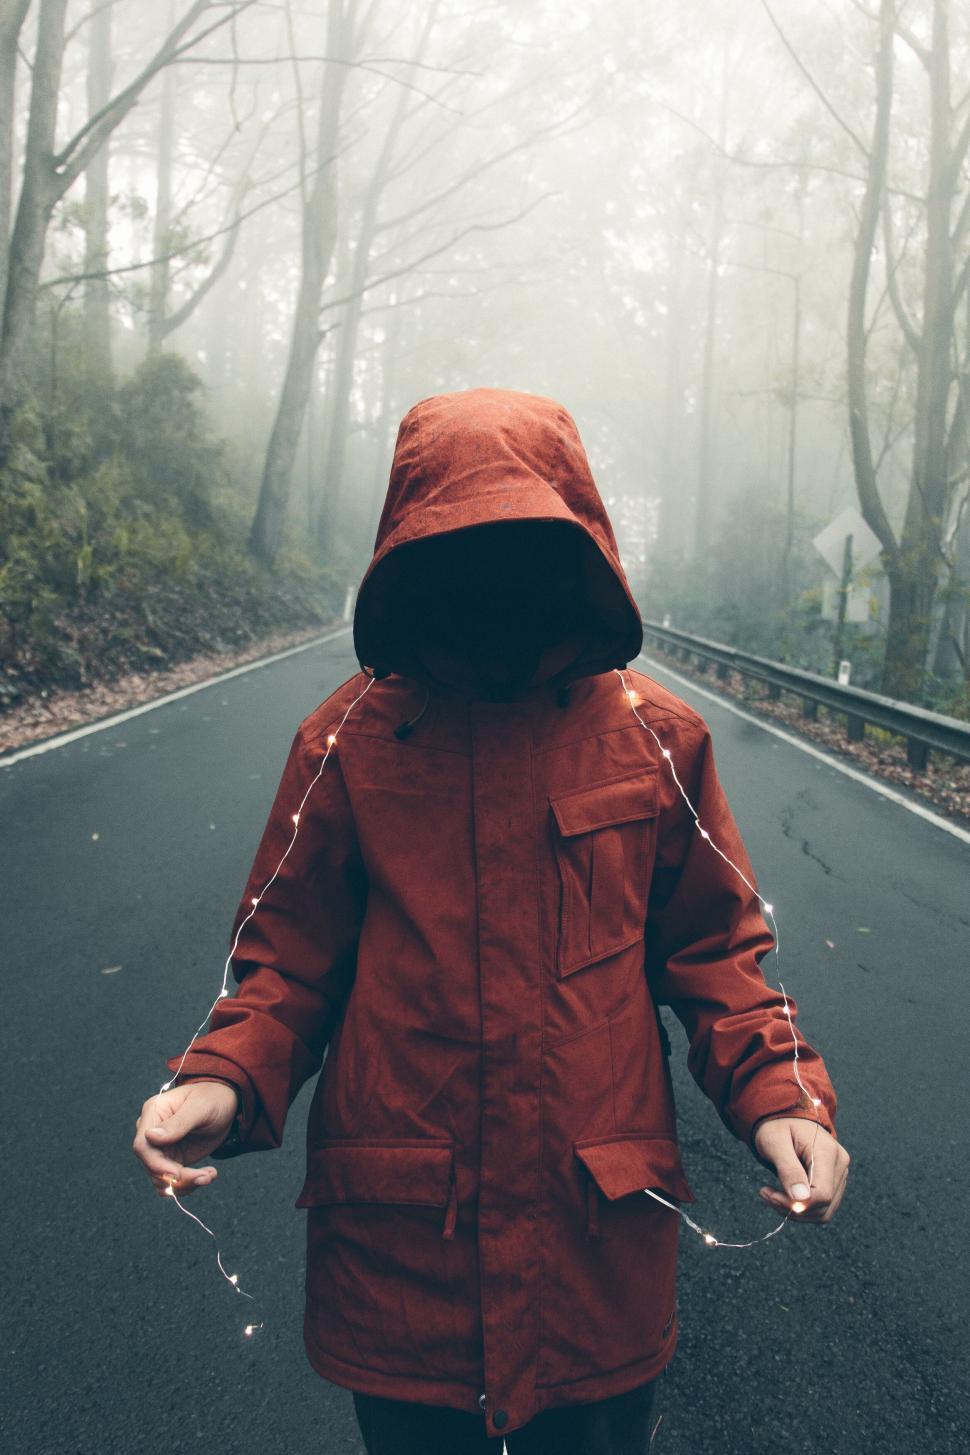 Free Image of Person in red hooded coat on foggy road 